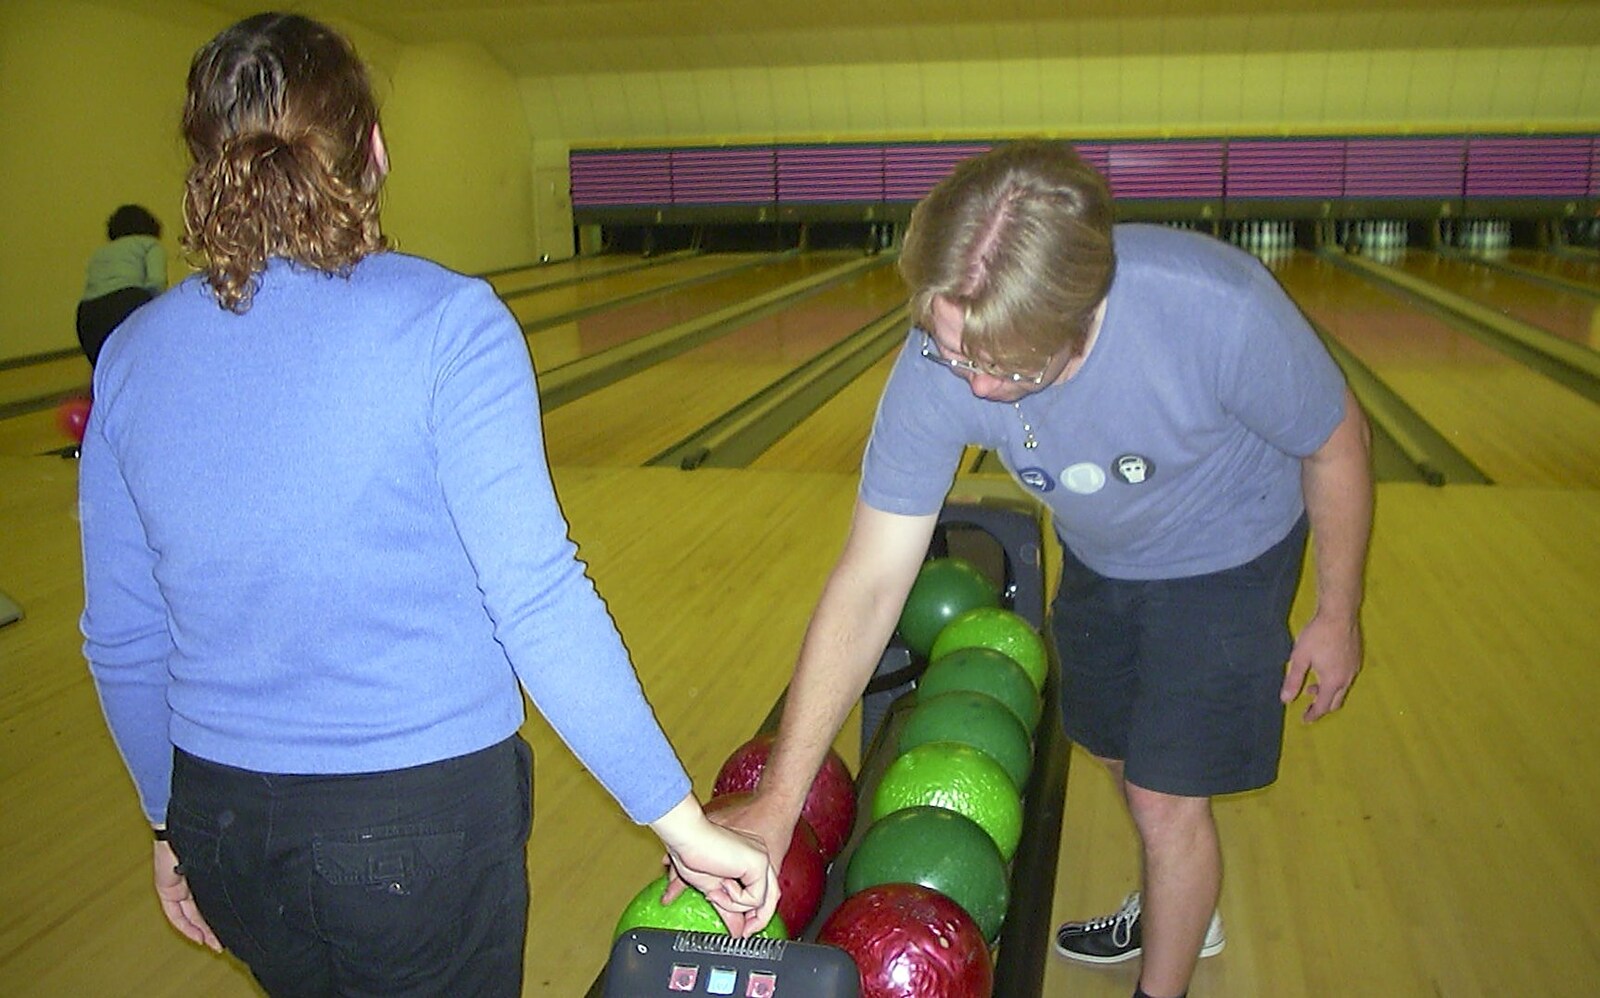 Lou gets ready to bowl from Ten Pin Bowling, Norwich, Norfolk - 13th September 2003